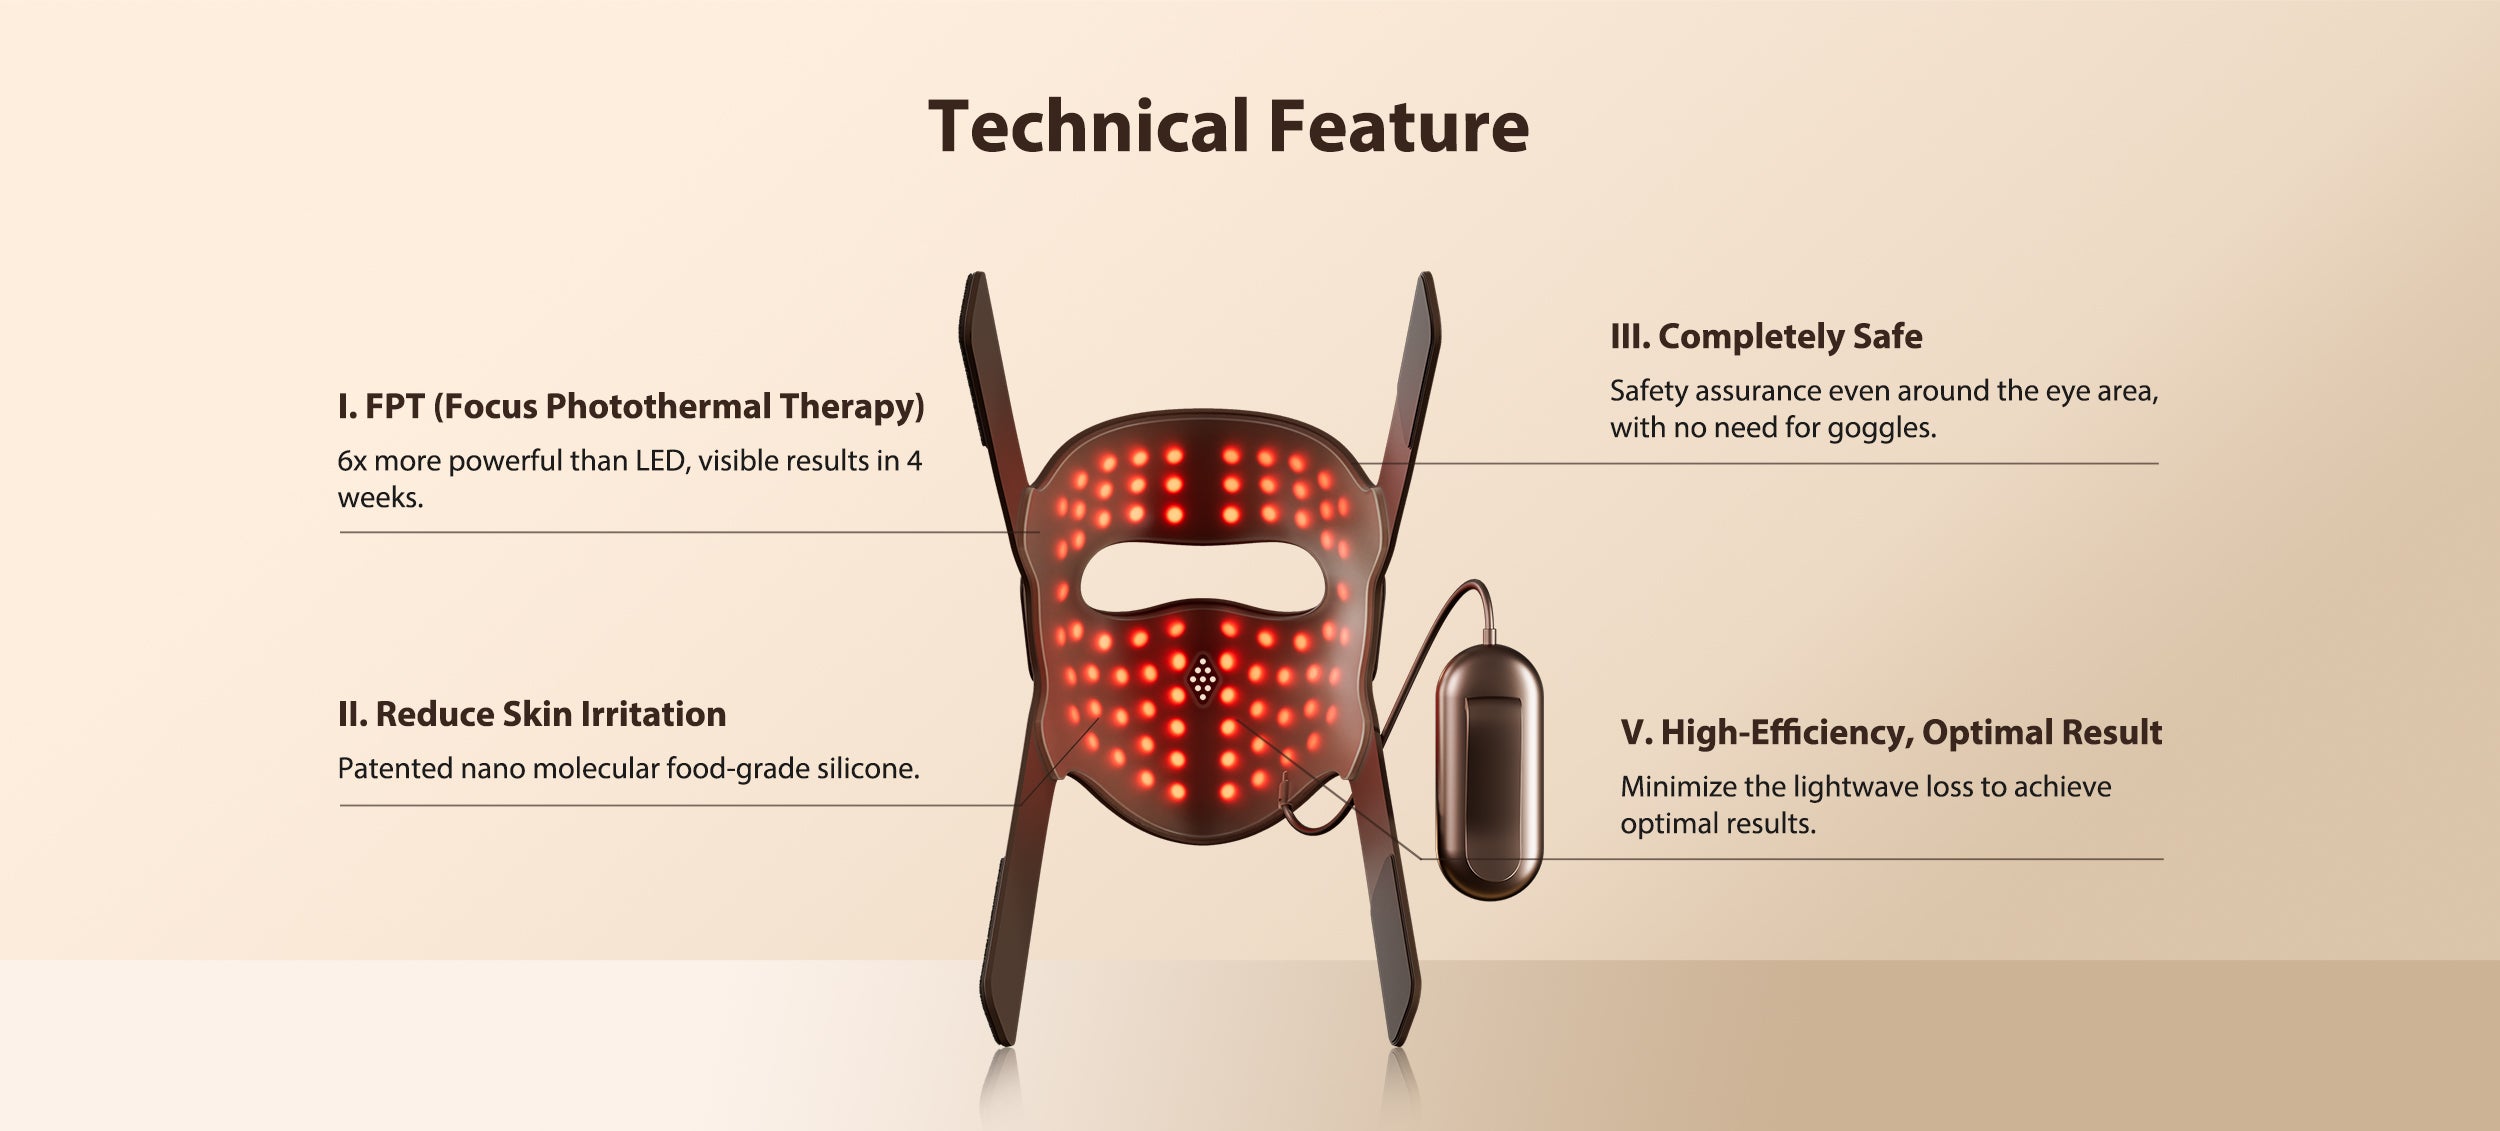 JOVS 4D Laser Light Therapy Mask showcasing FPT technology, skin irritation reduction, safety without goggles, and high-efficiency treatment.